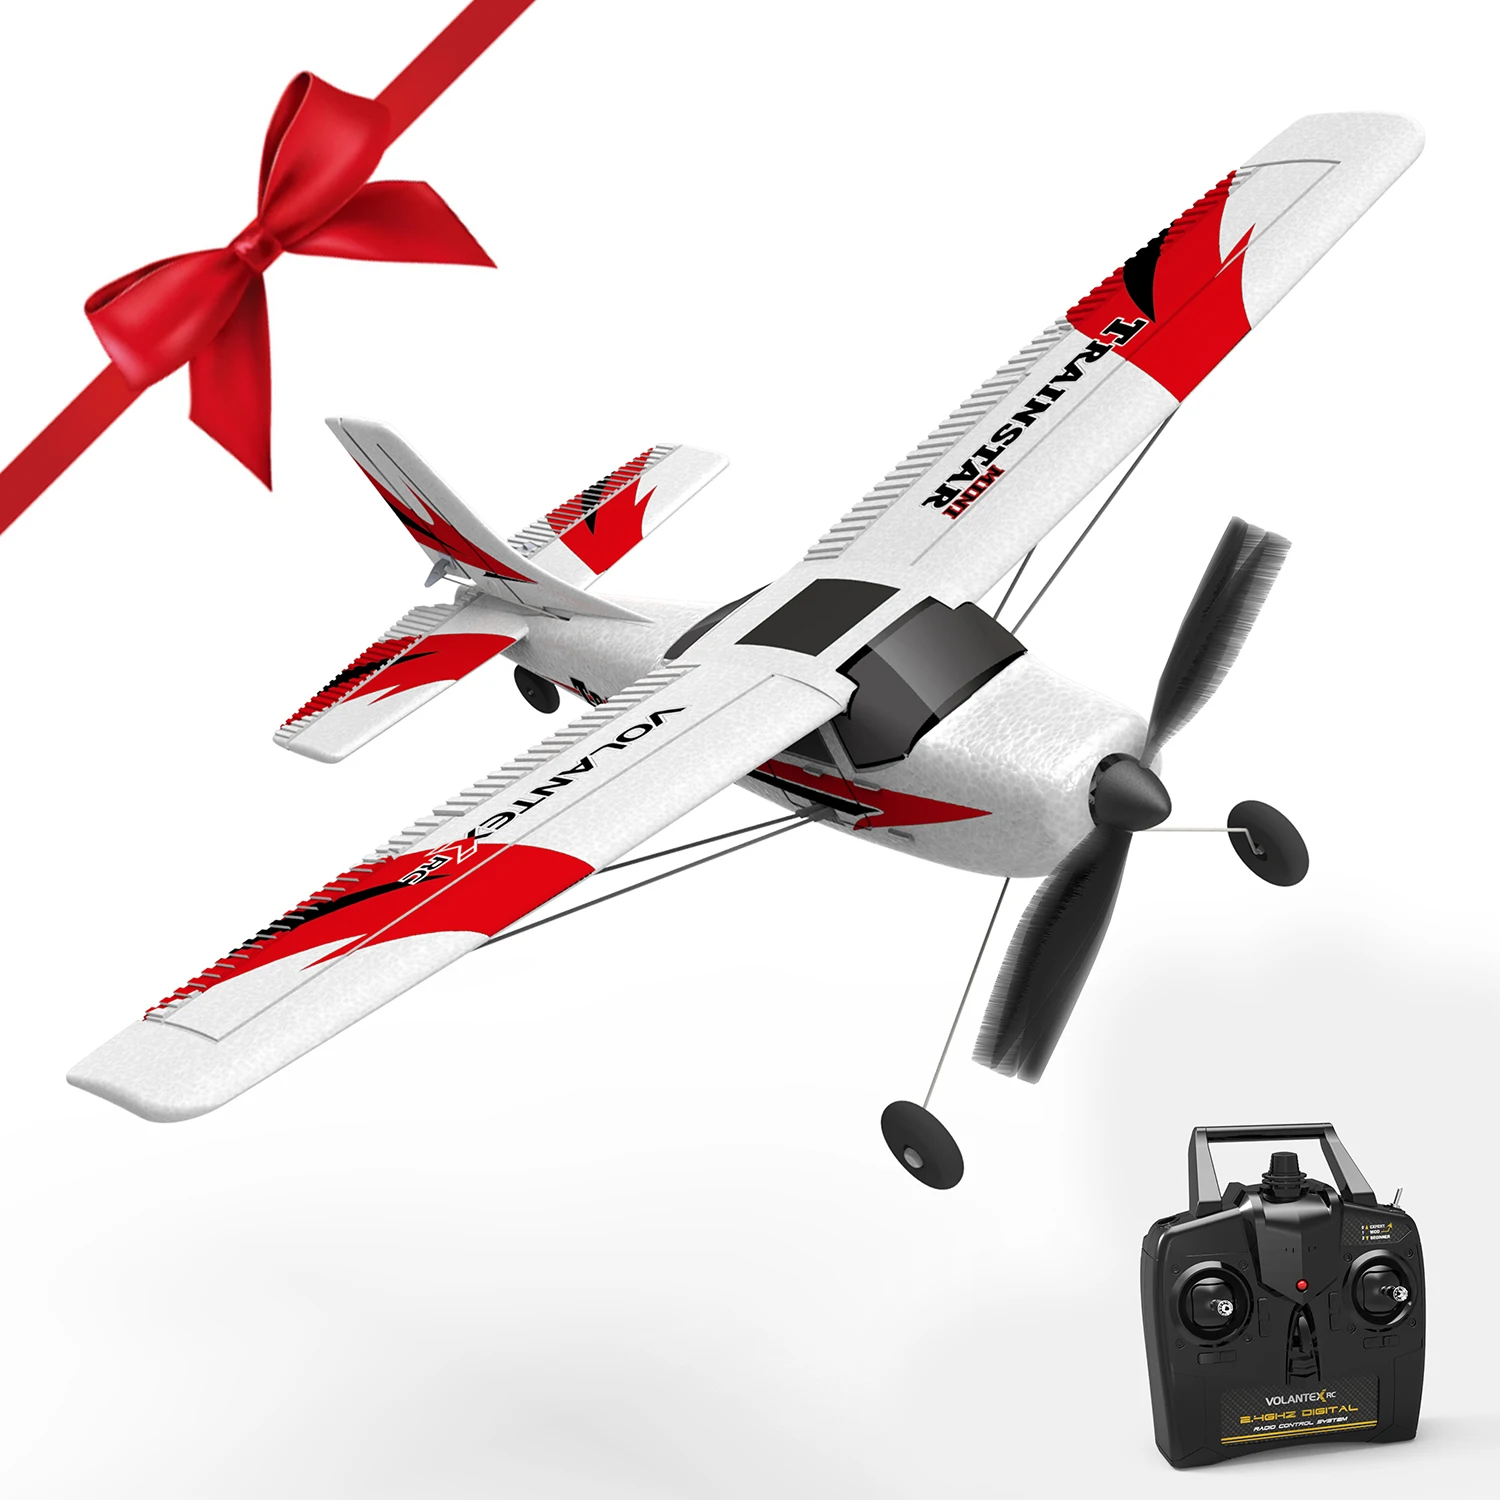 

Trainstar Mini 400 3CH RC Airplane RTF with Xpilot Stabilizer One-key Aerobatic Fixed-wing Outdoor Toys For Children Kids